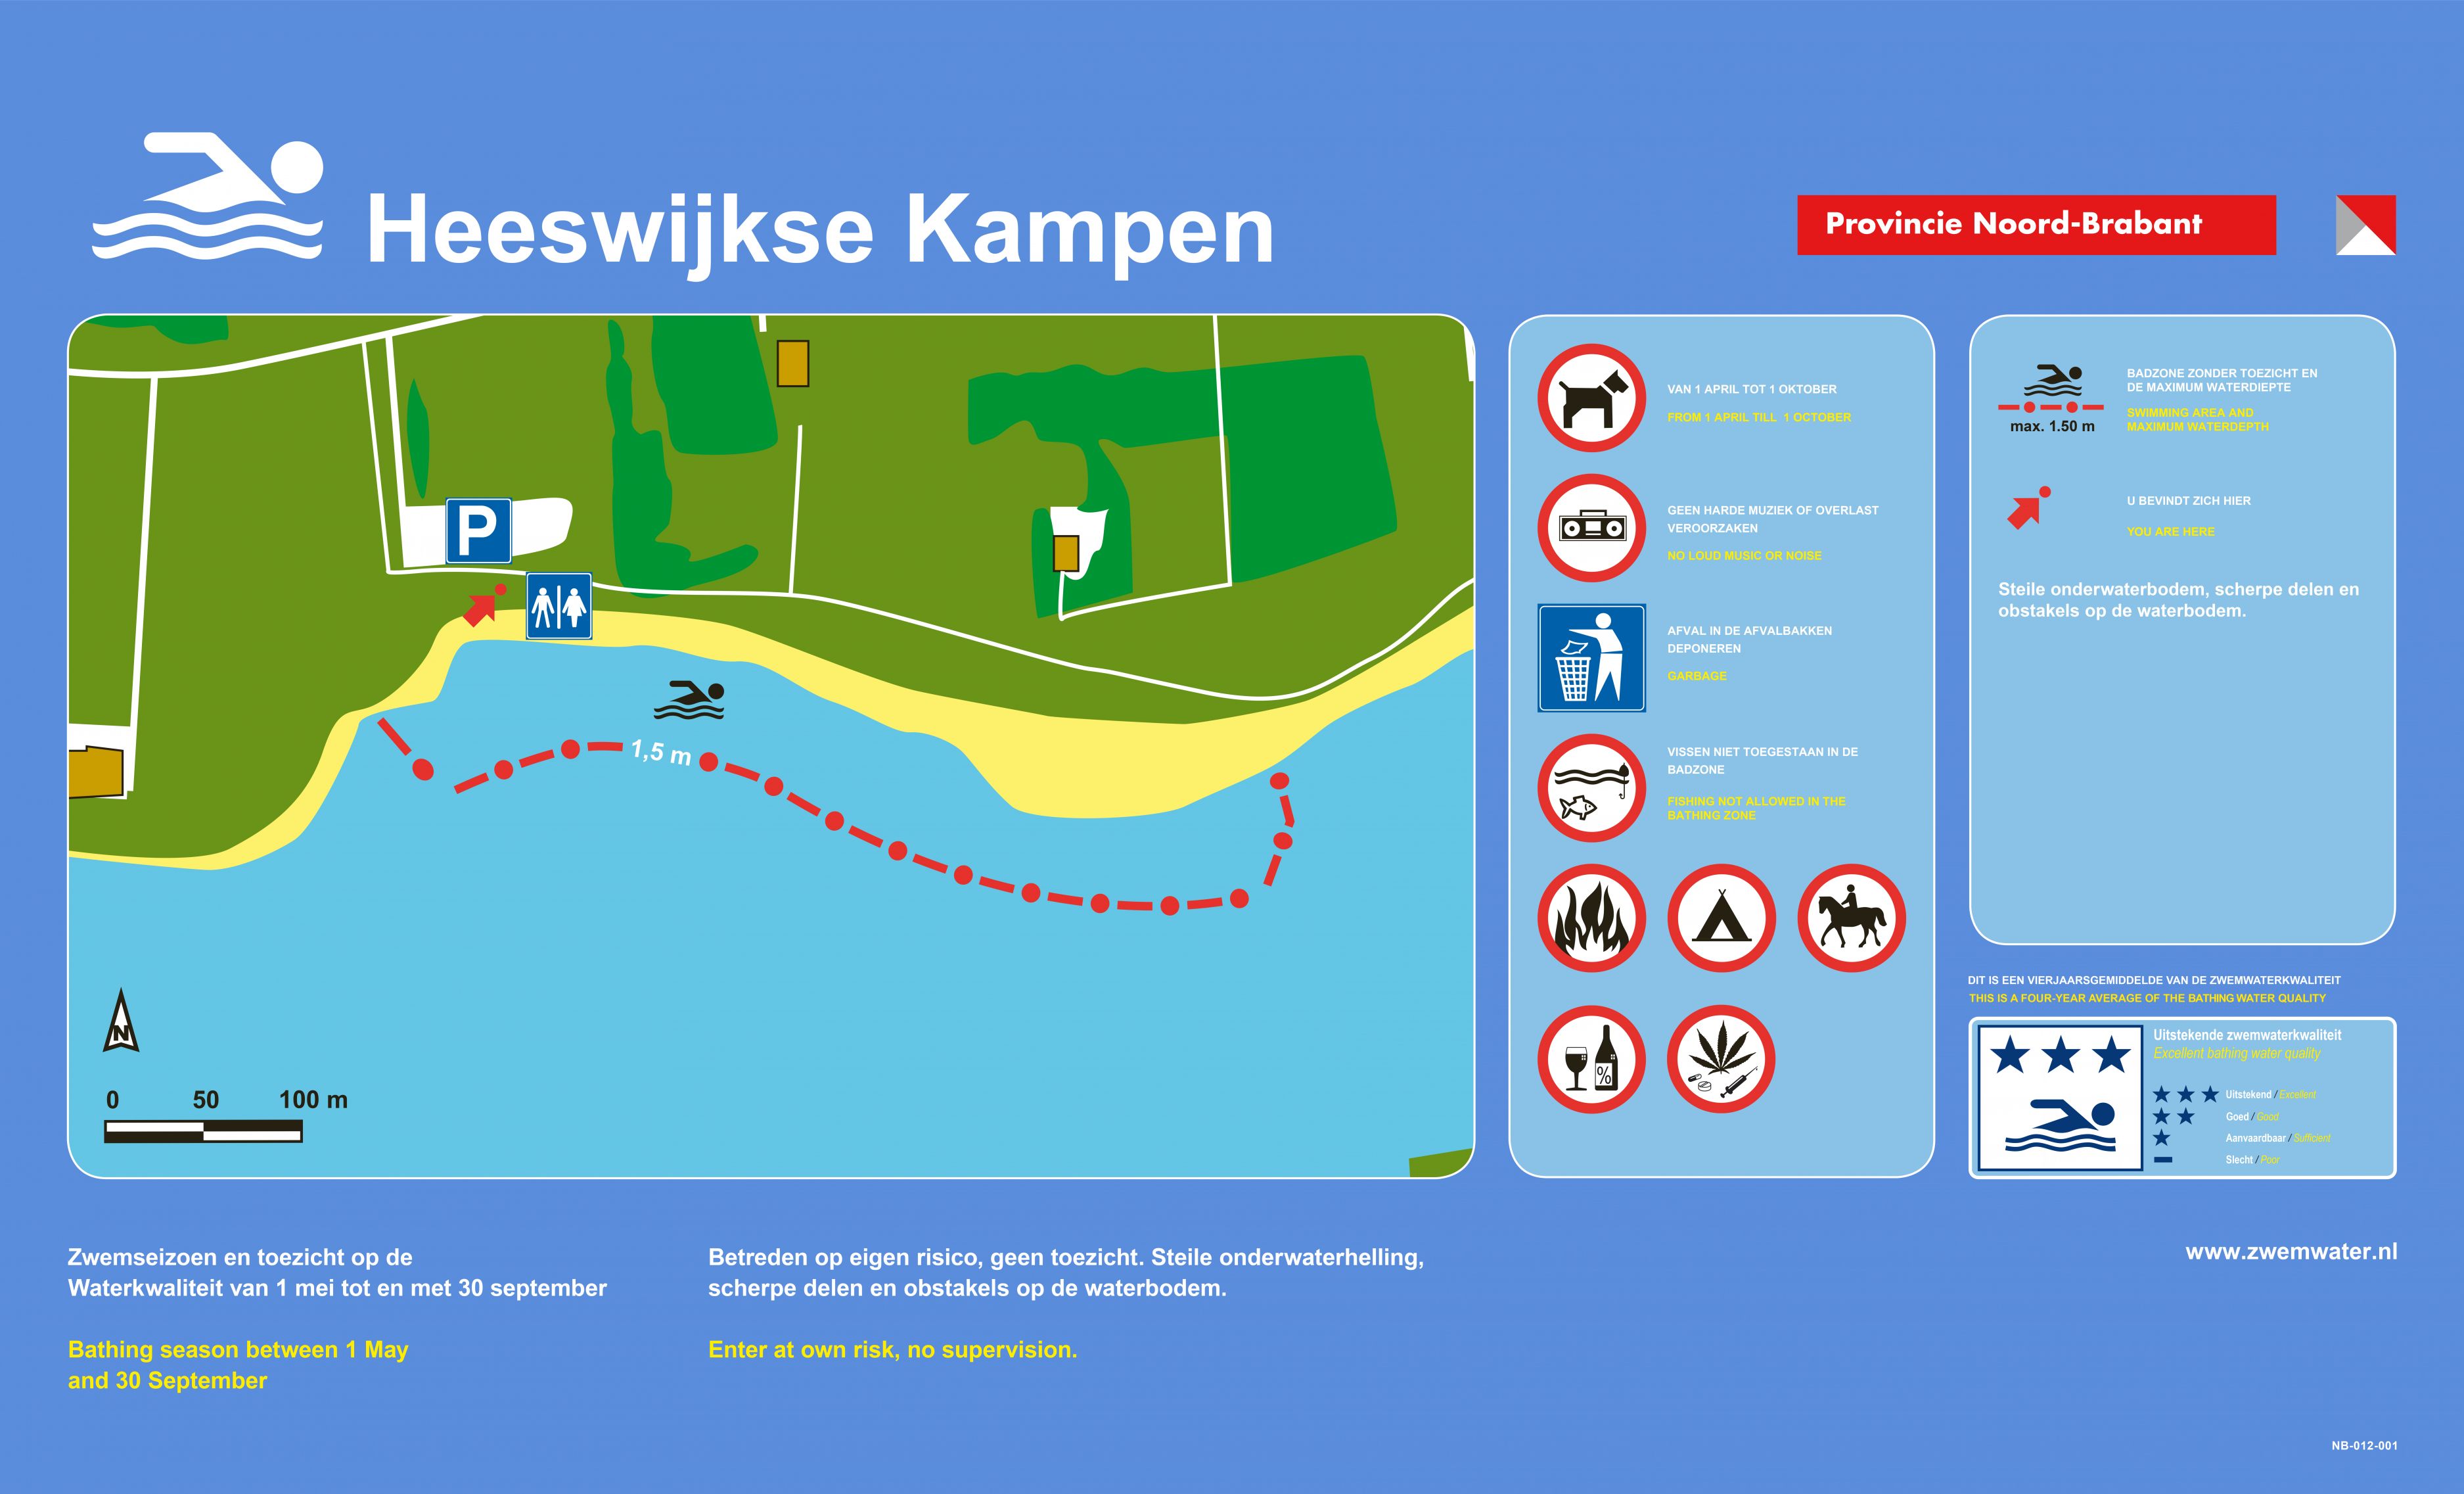 The information board at the swimming location Heeswijkse Kampen